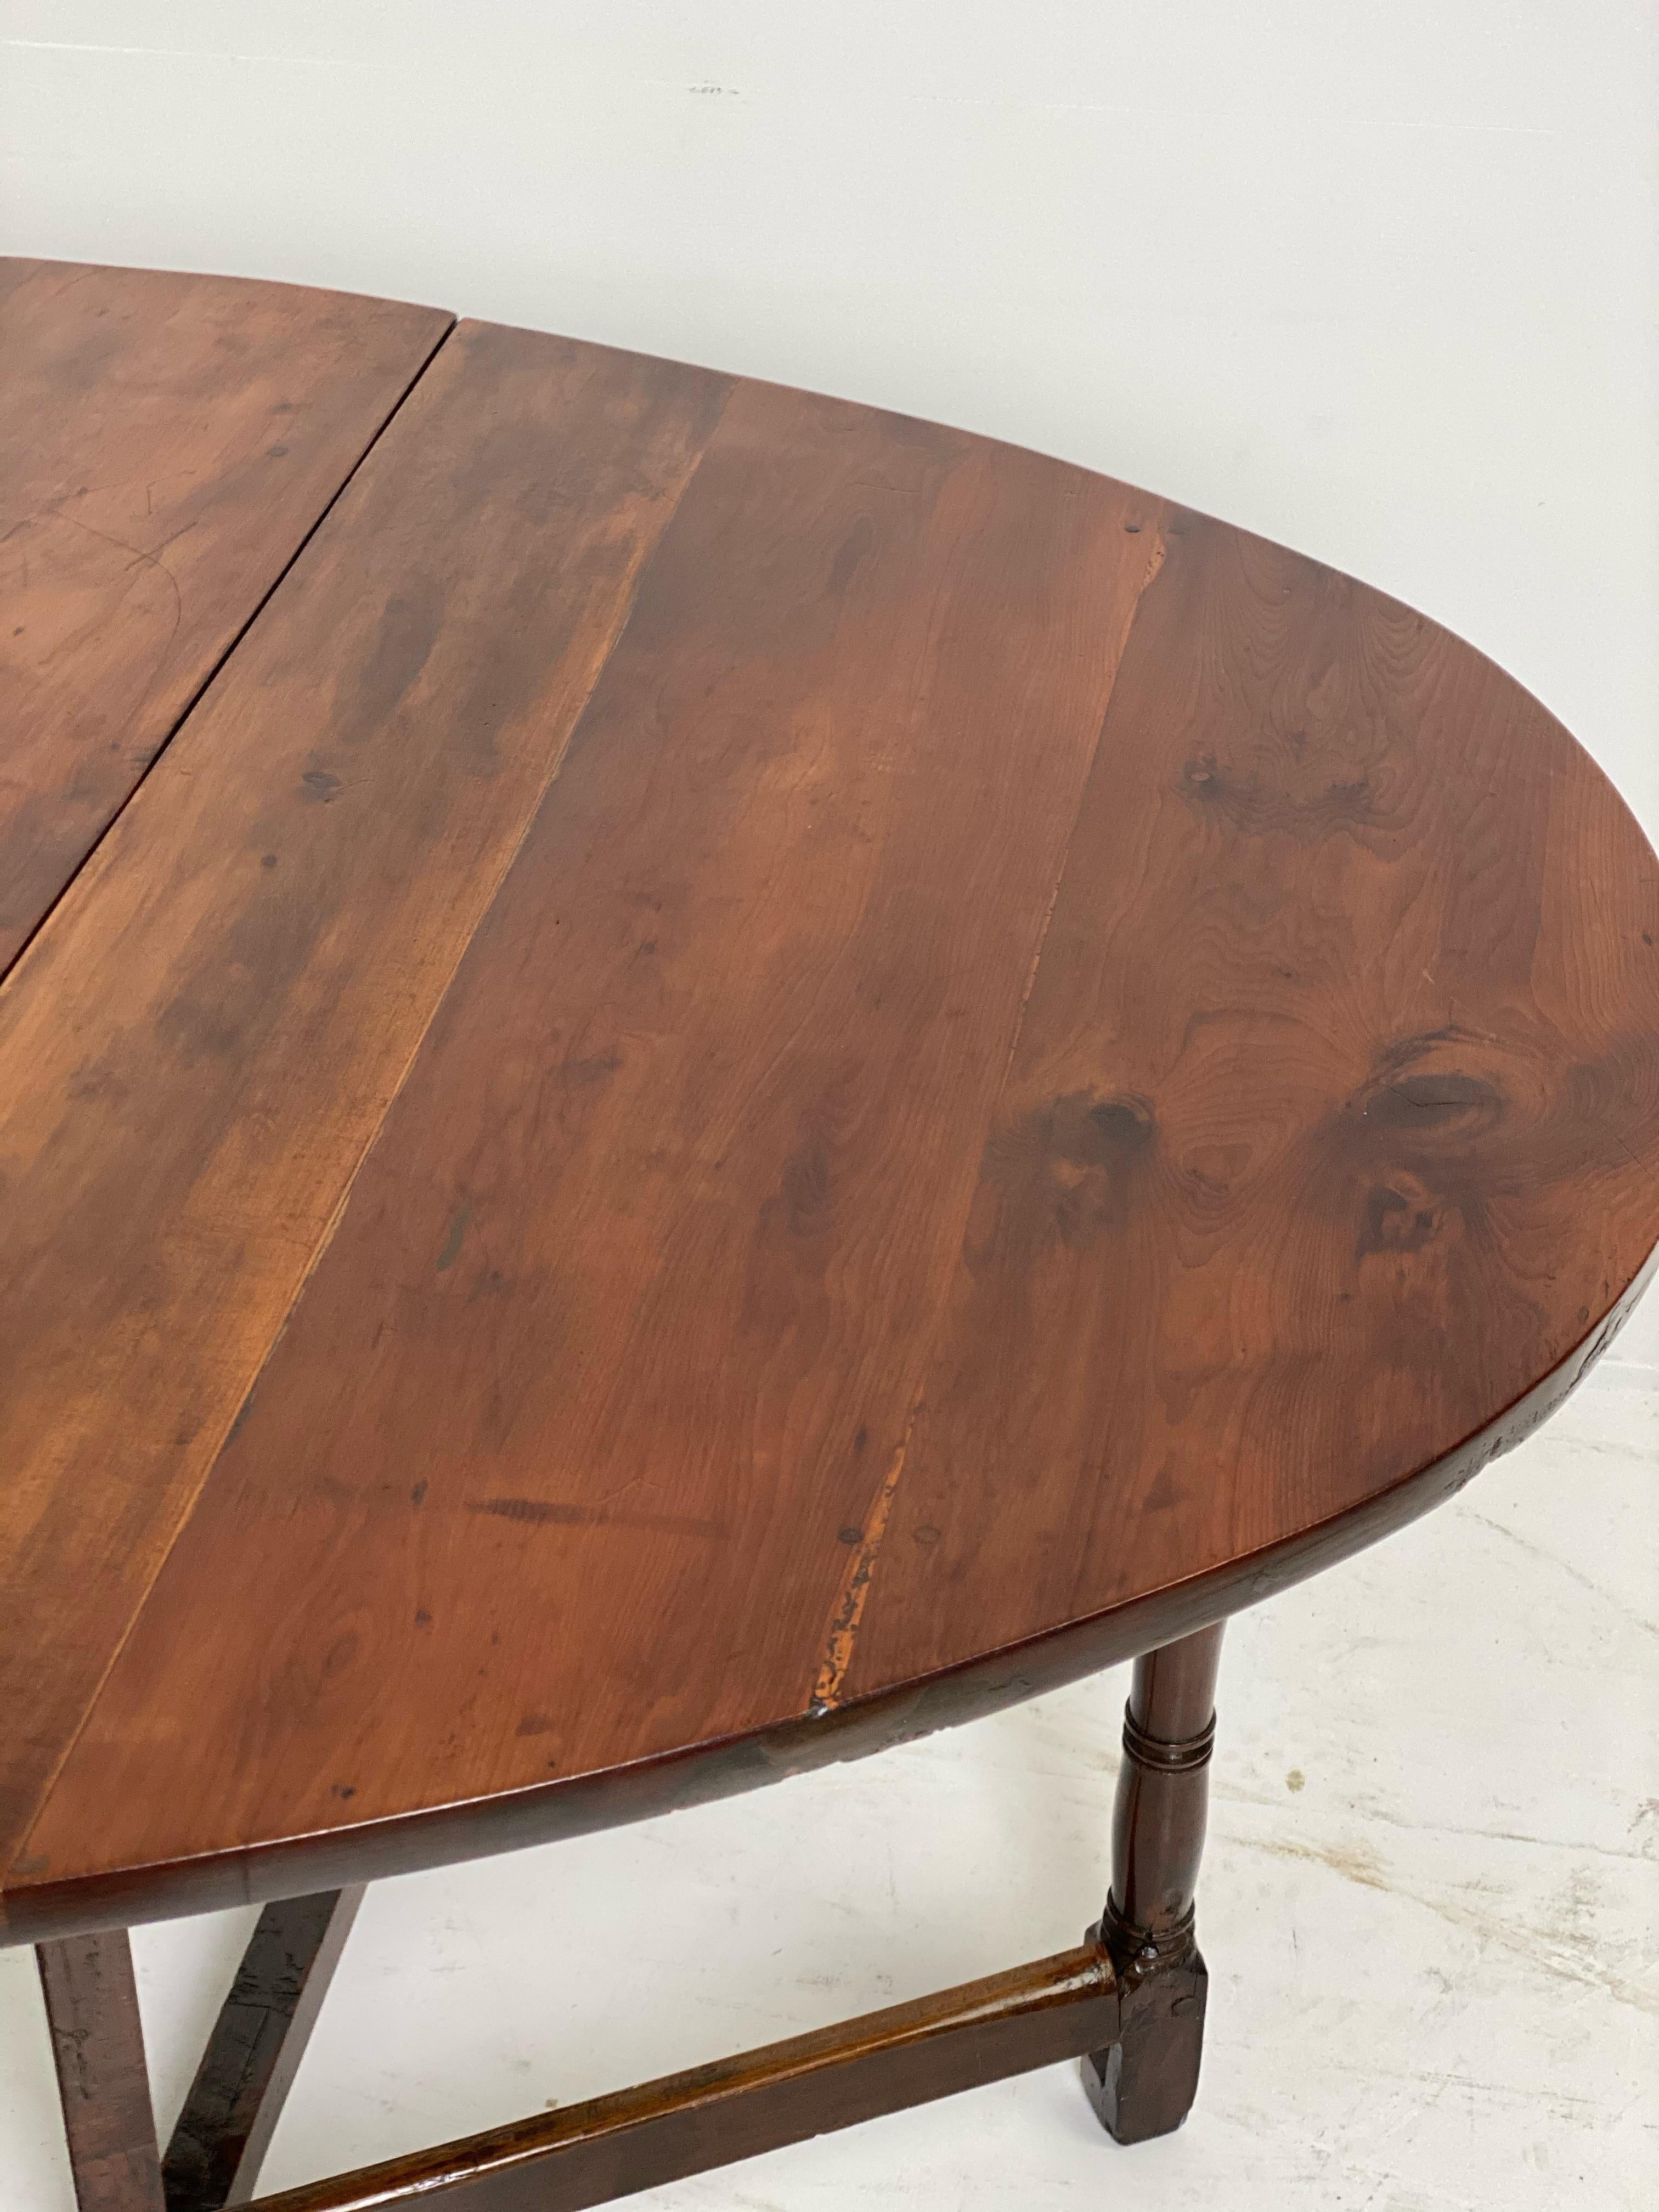 British Exceptional English Antique Gatelag Table in Yew Wood, 18 th Century For Sale